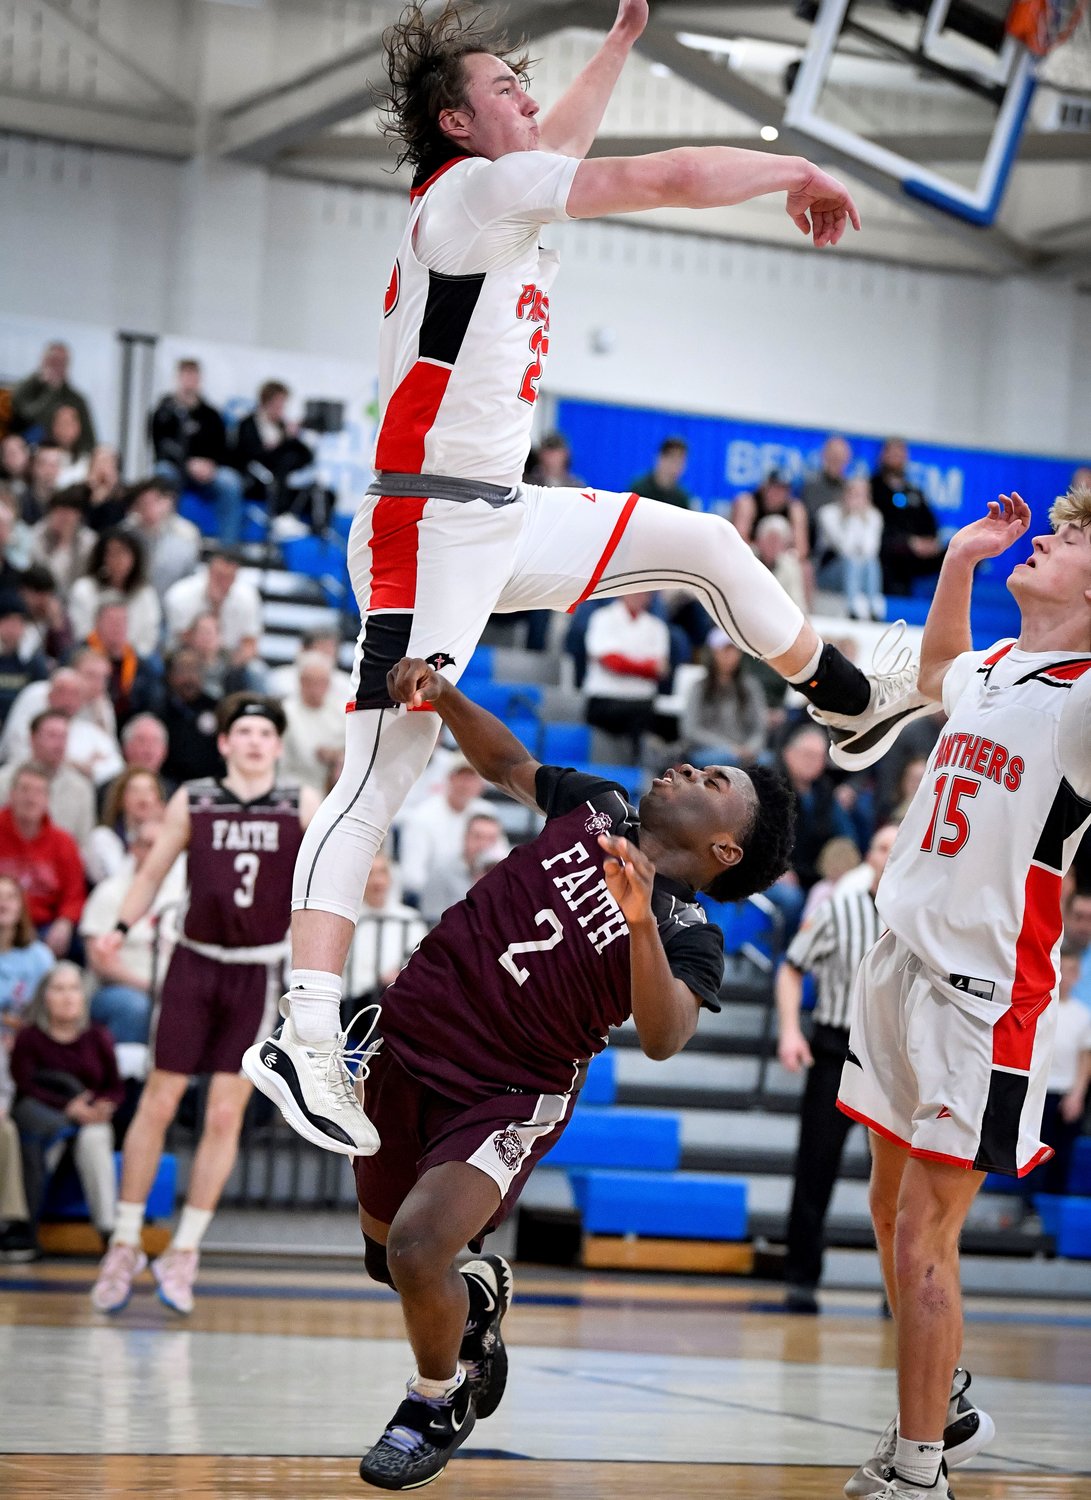 Plumstead’s Jackson Mott soars over Faith’s Gerald Pinkney while going after a rebound.